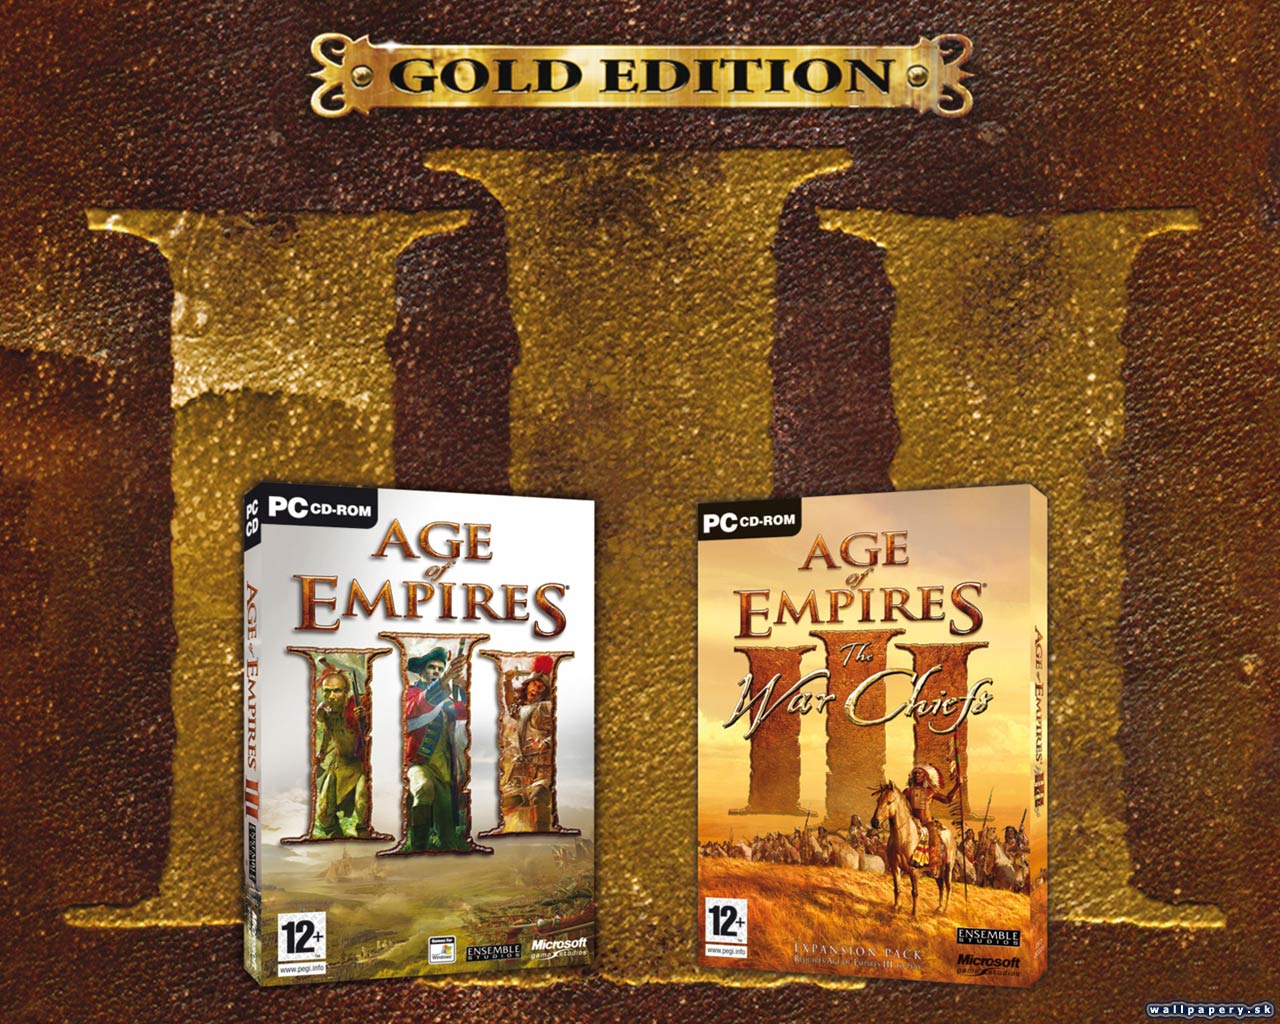 Age of Empires 3: Gold Edition - wallpaper 2